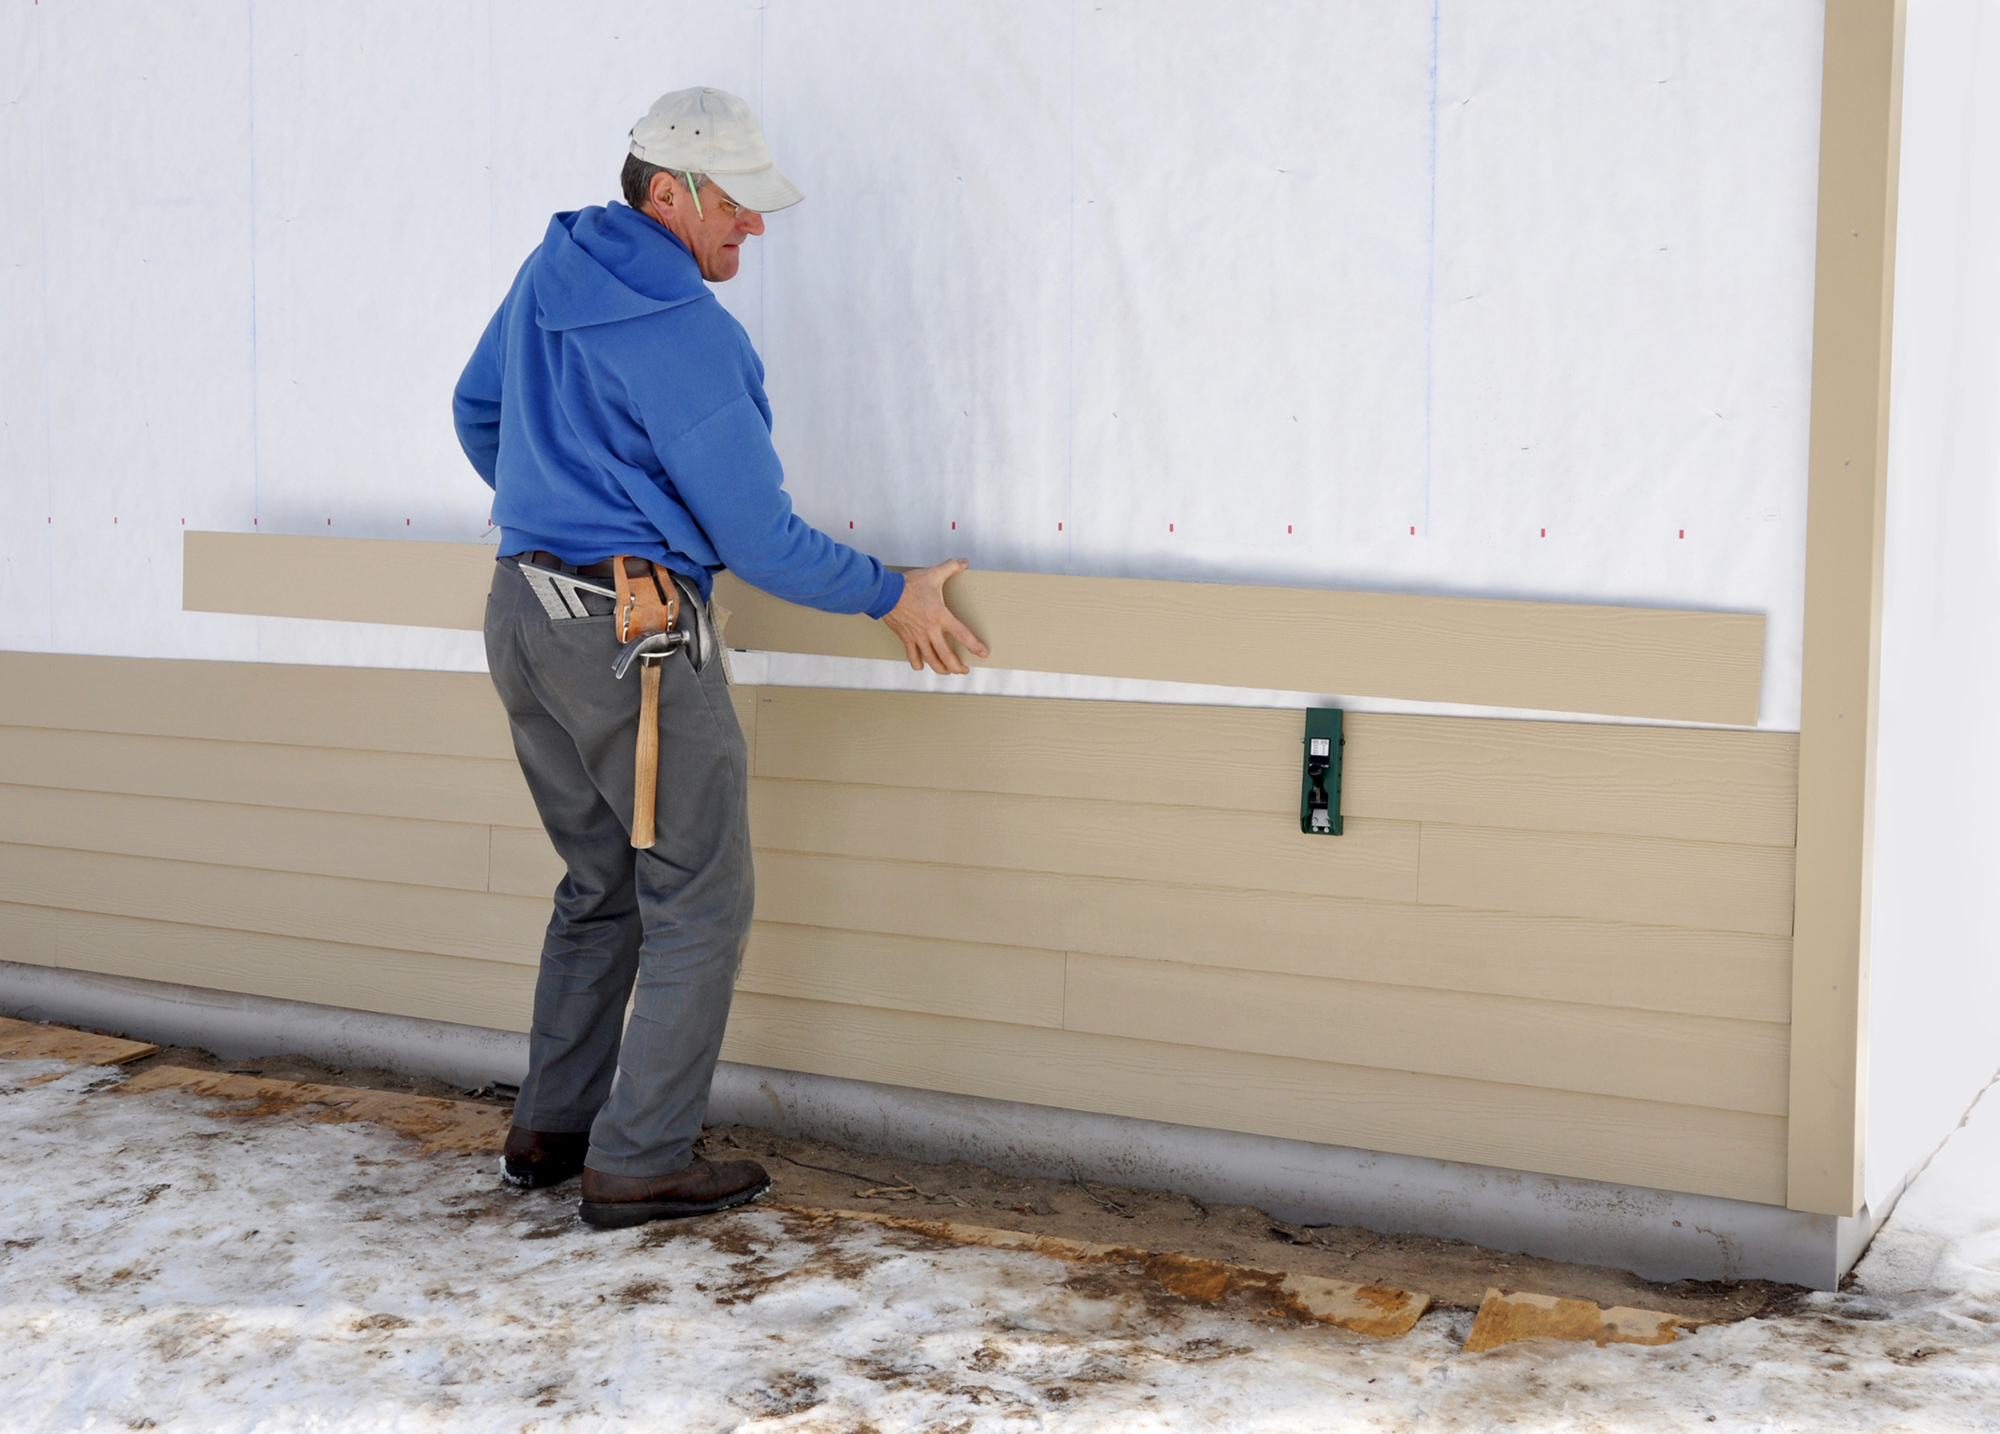 A person installing siding on a house.